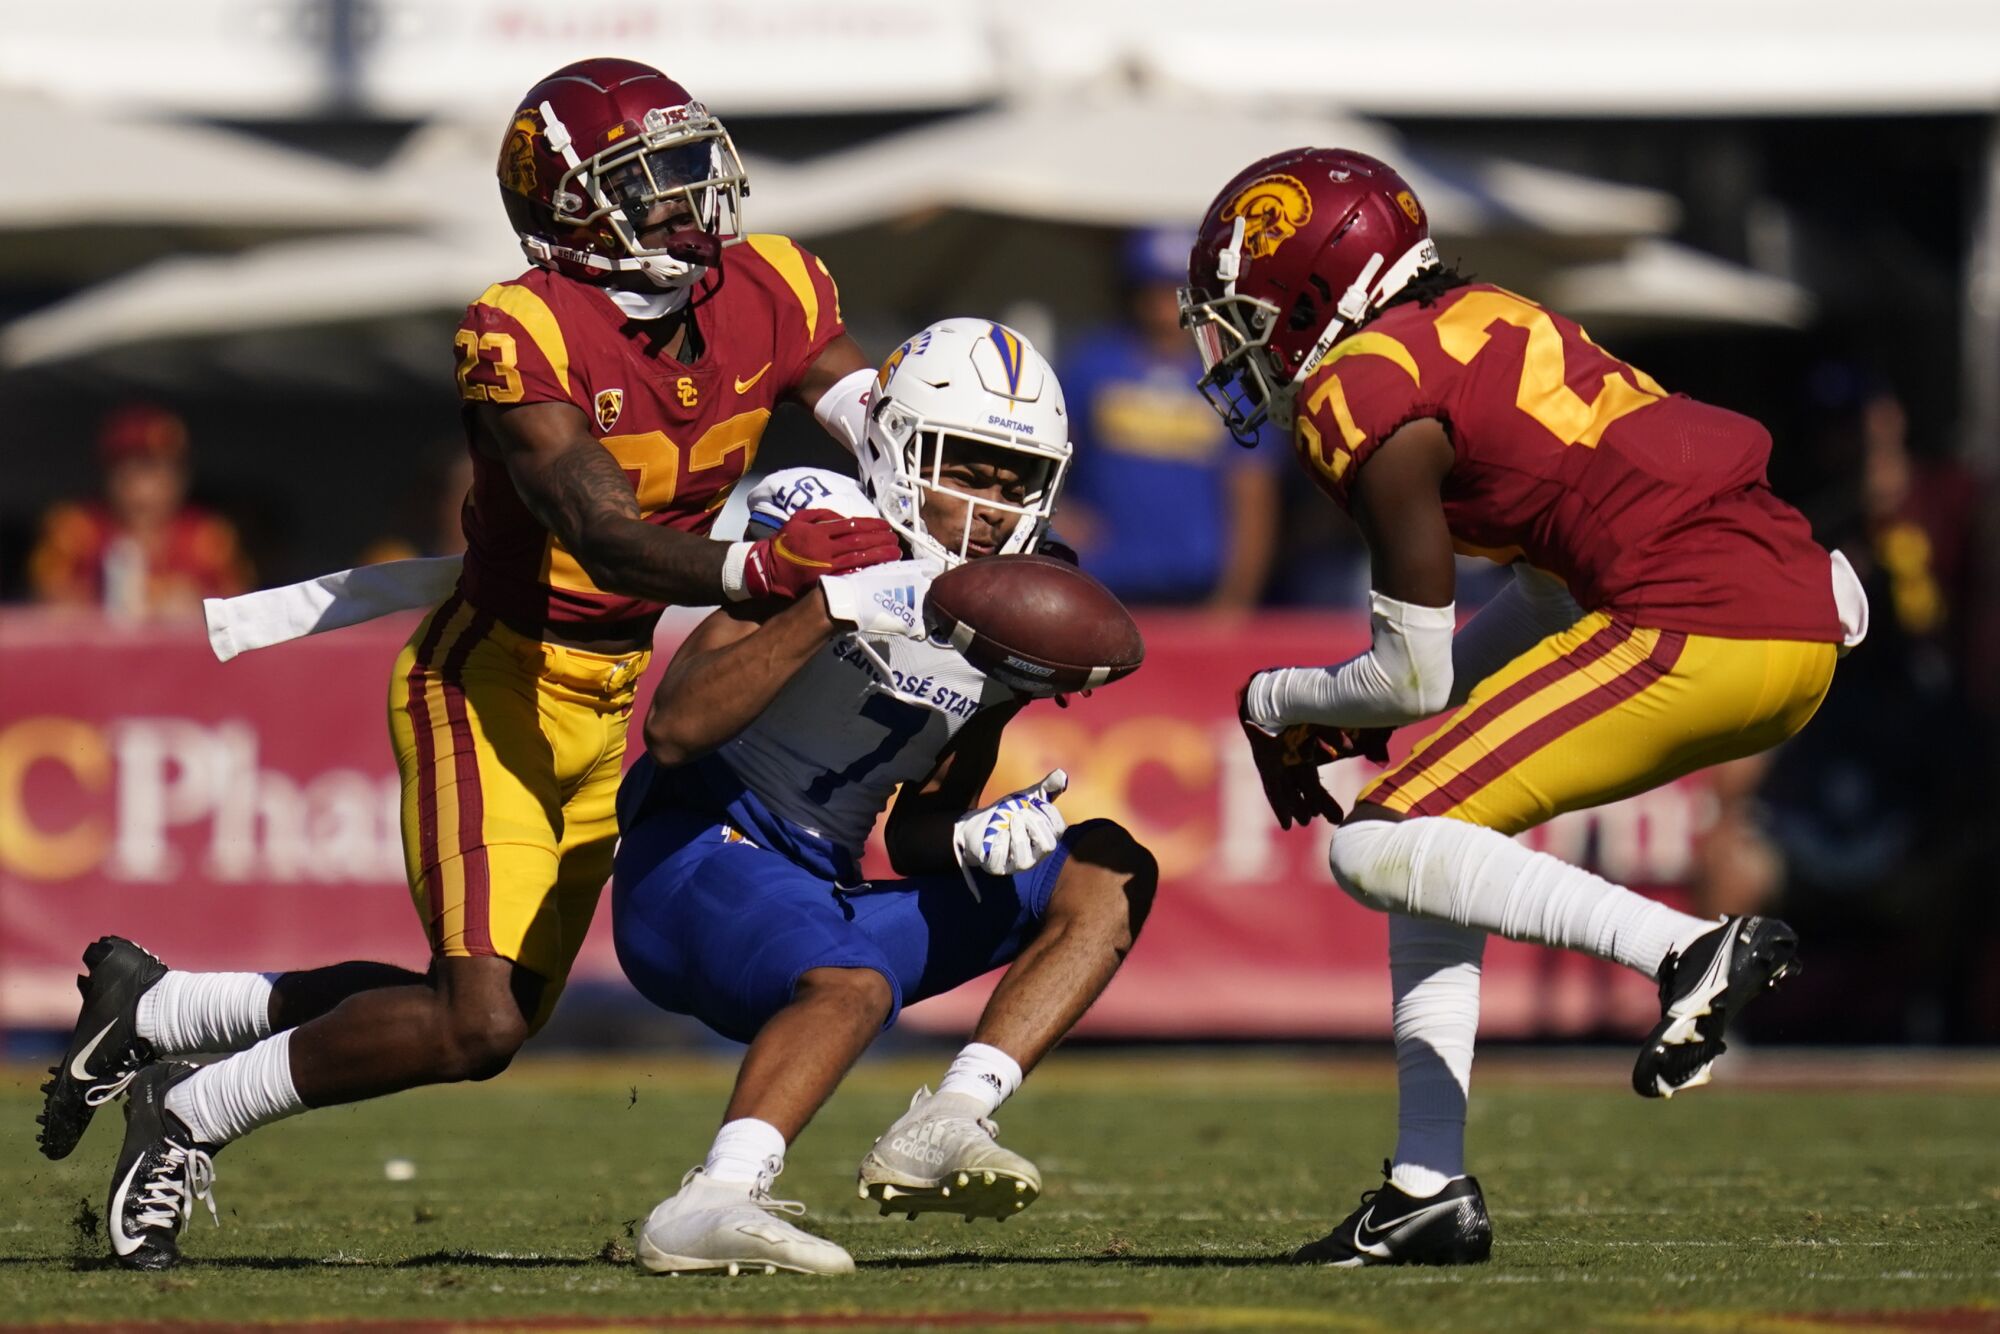 San Jose State wide receiver Charles Ross (7) can't hold on to a pass